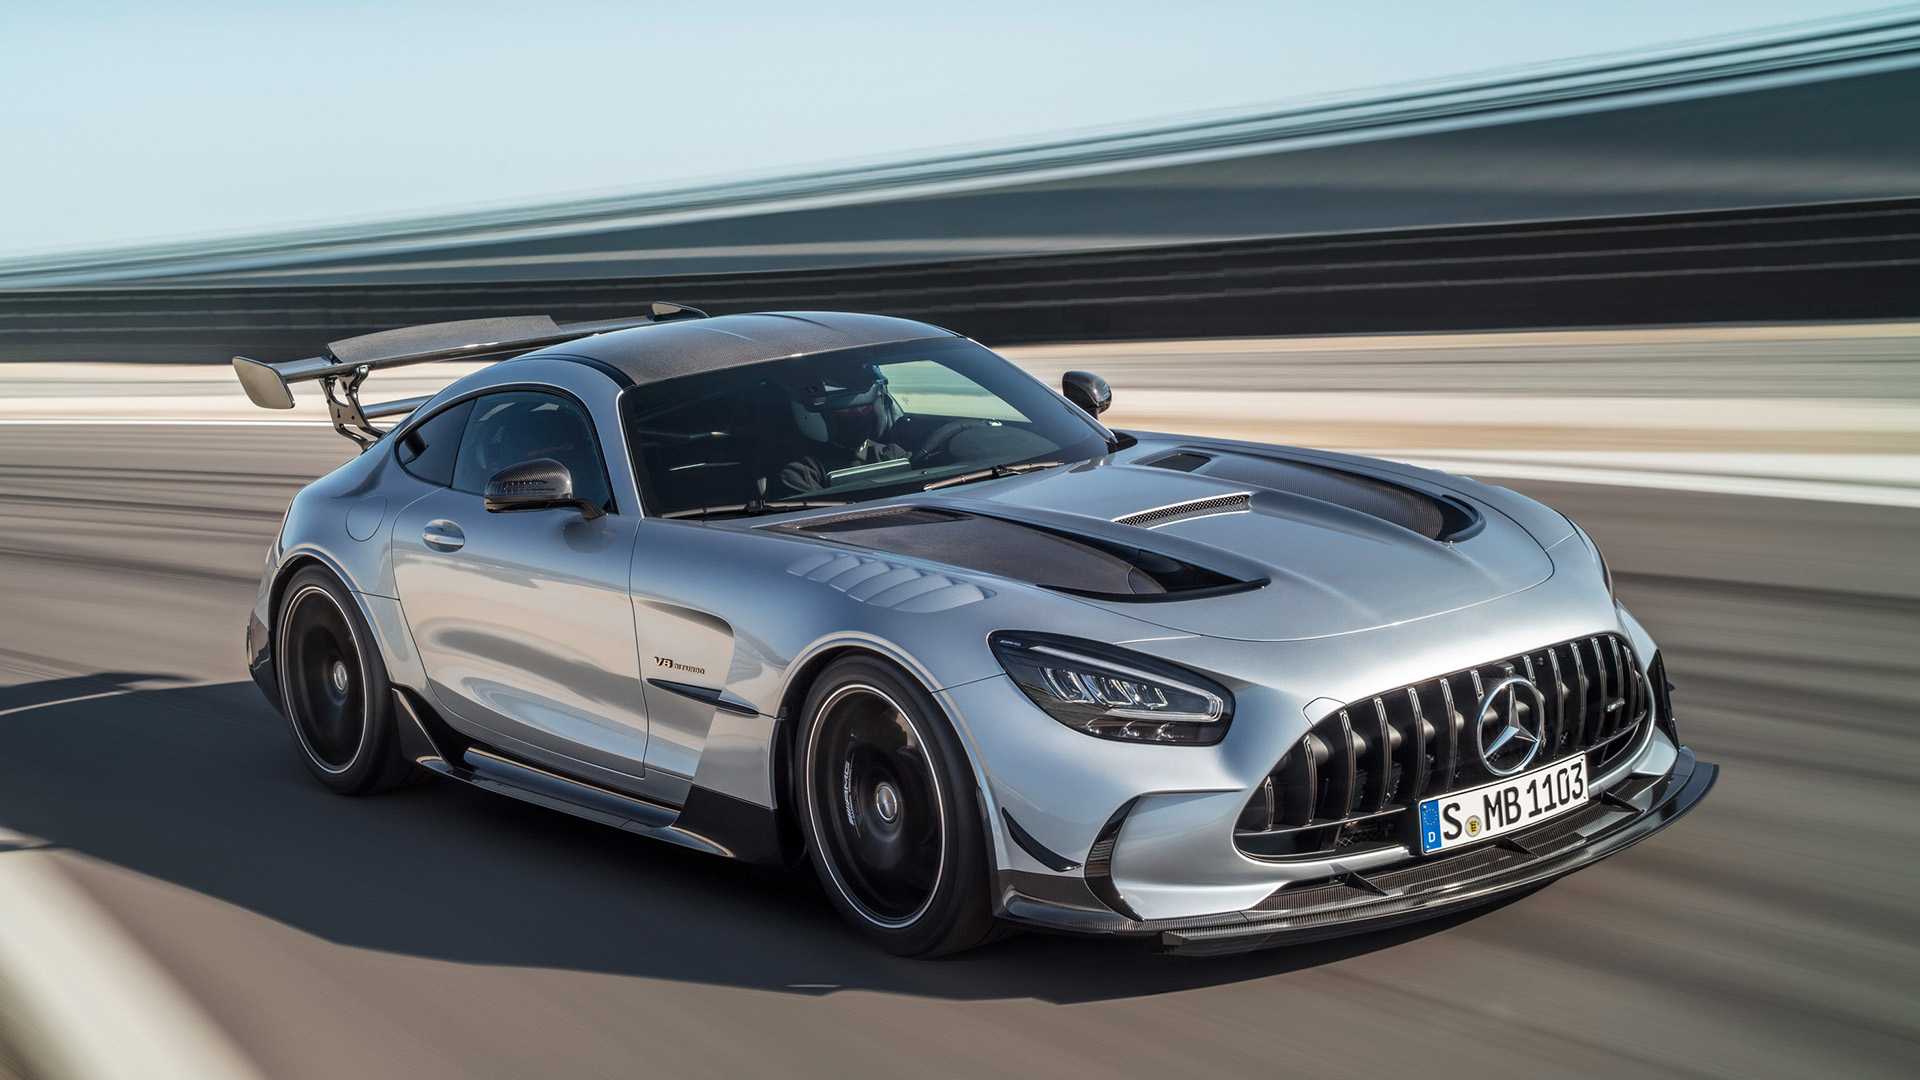 Mercedes-AMG GT Black Series driving at high speed